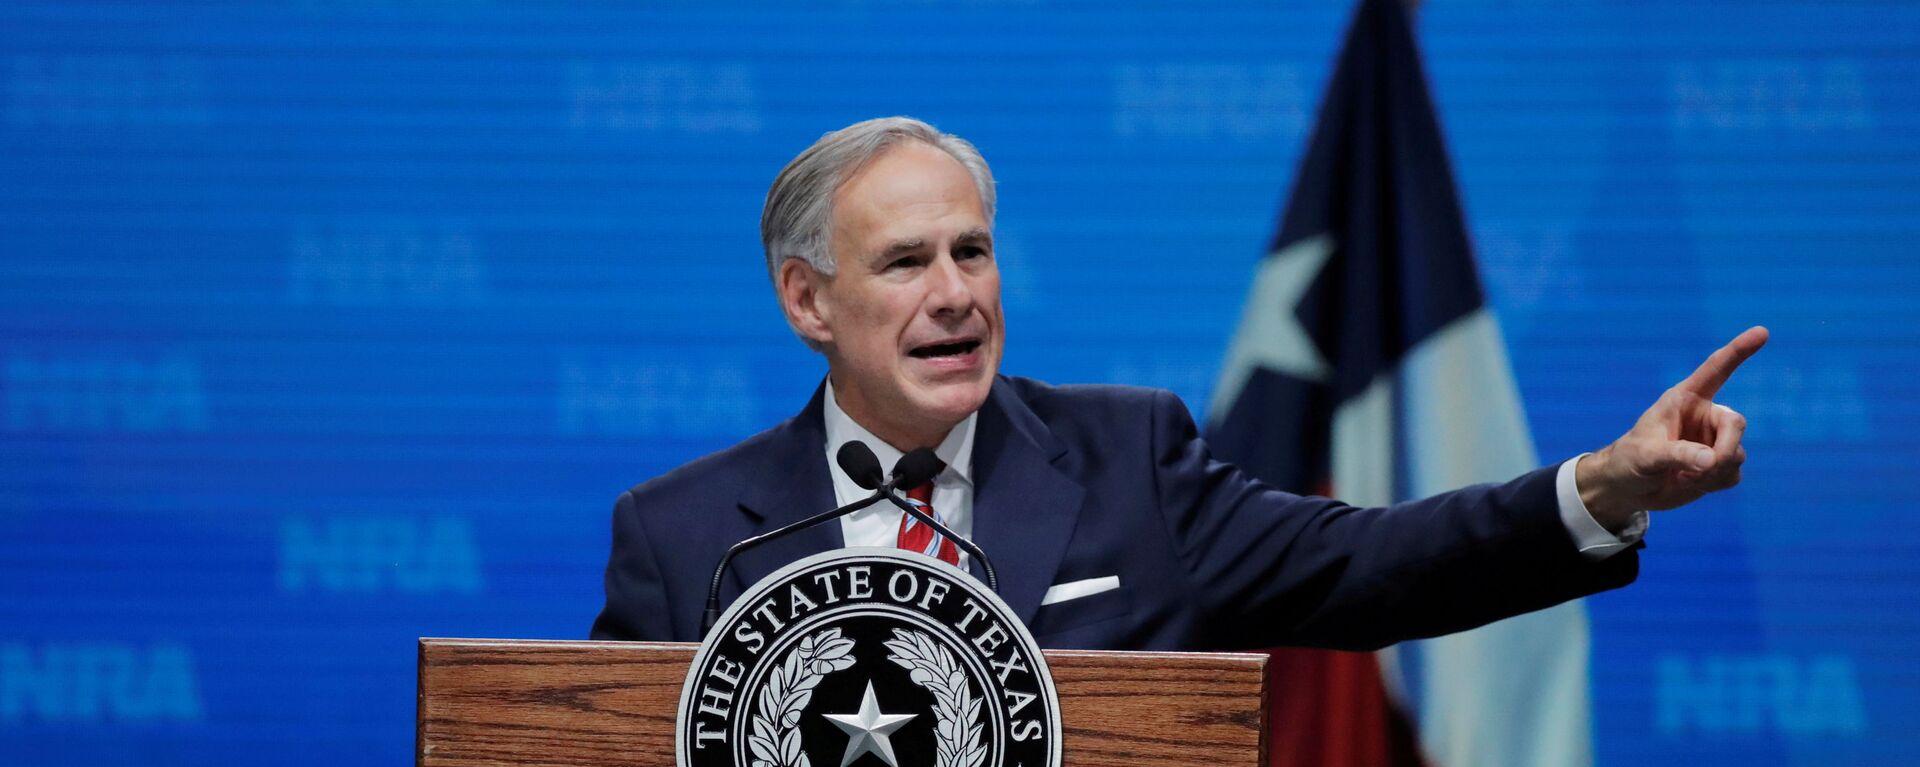 Texas Governor Greg Abbott speaks at the annual National Rifle Association (NRA) convention in Dallas, Texas, U.S., May 4, 2018 - Sputnik International, 1920, 24.02.2022